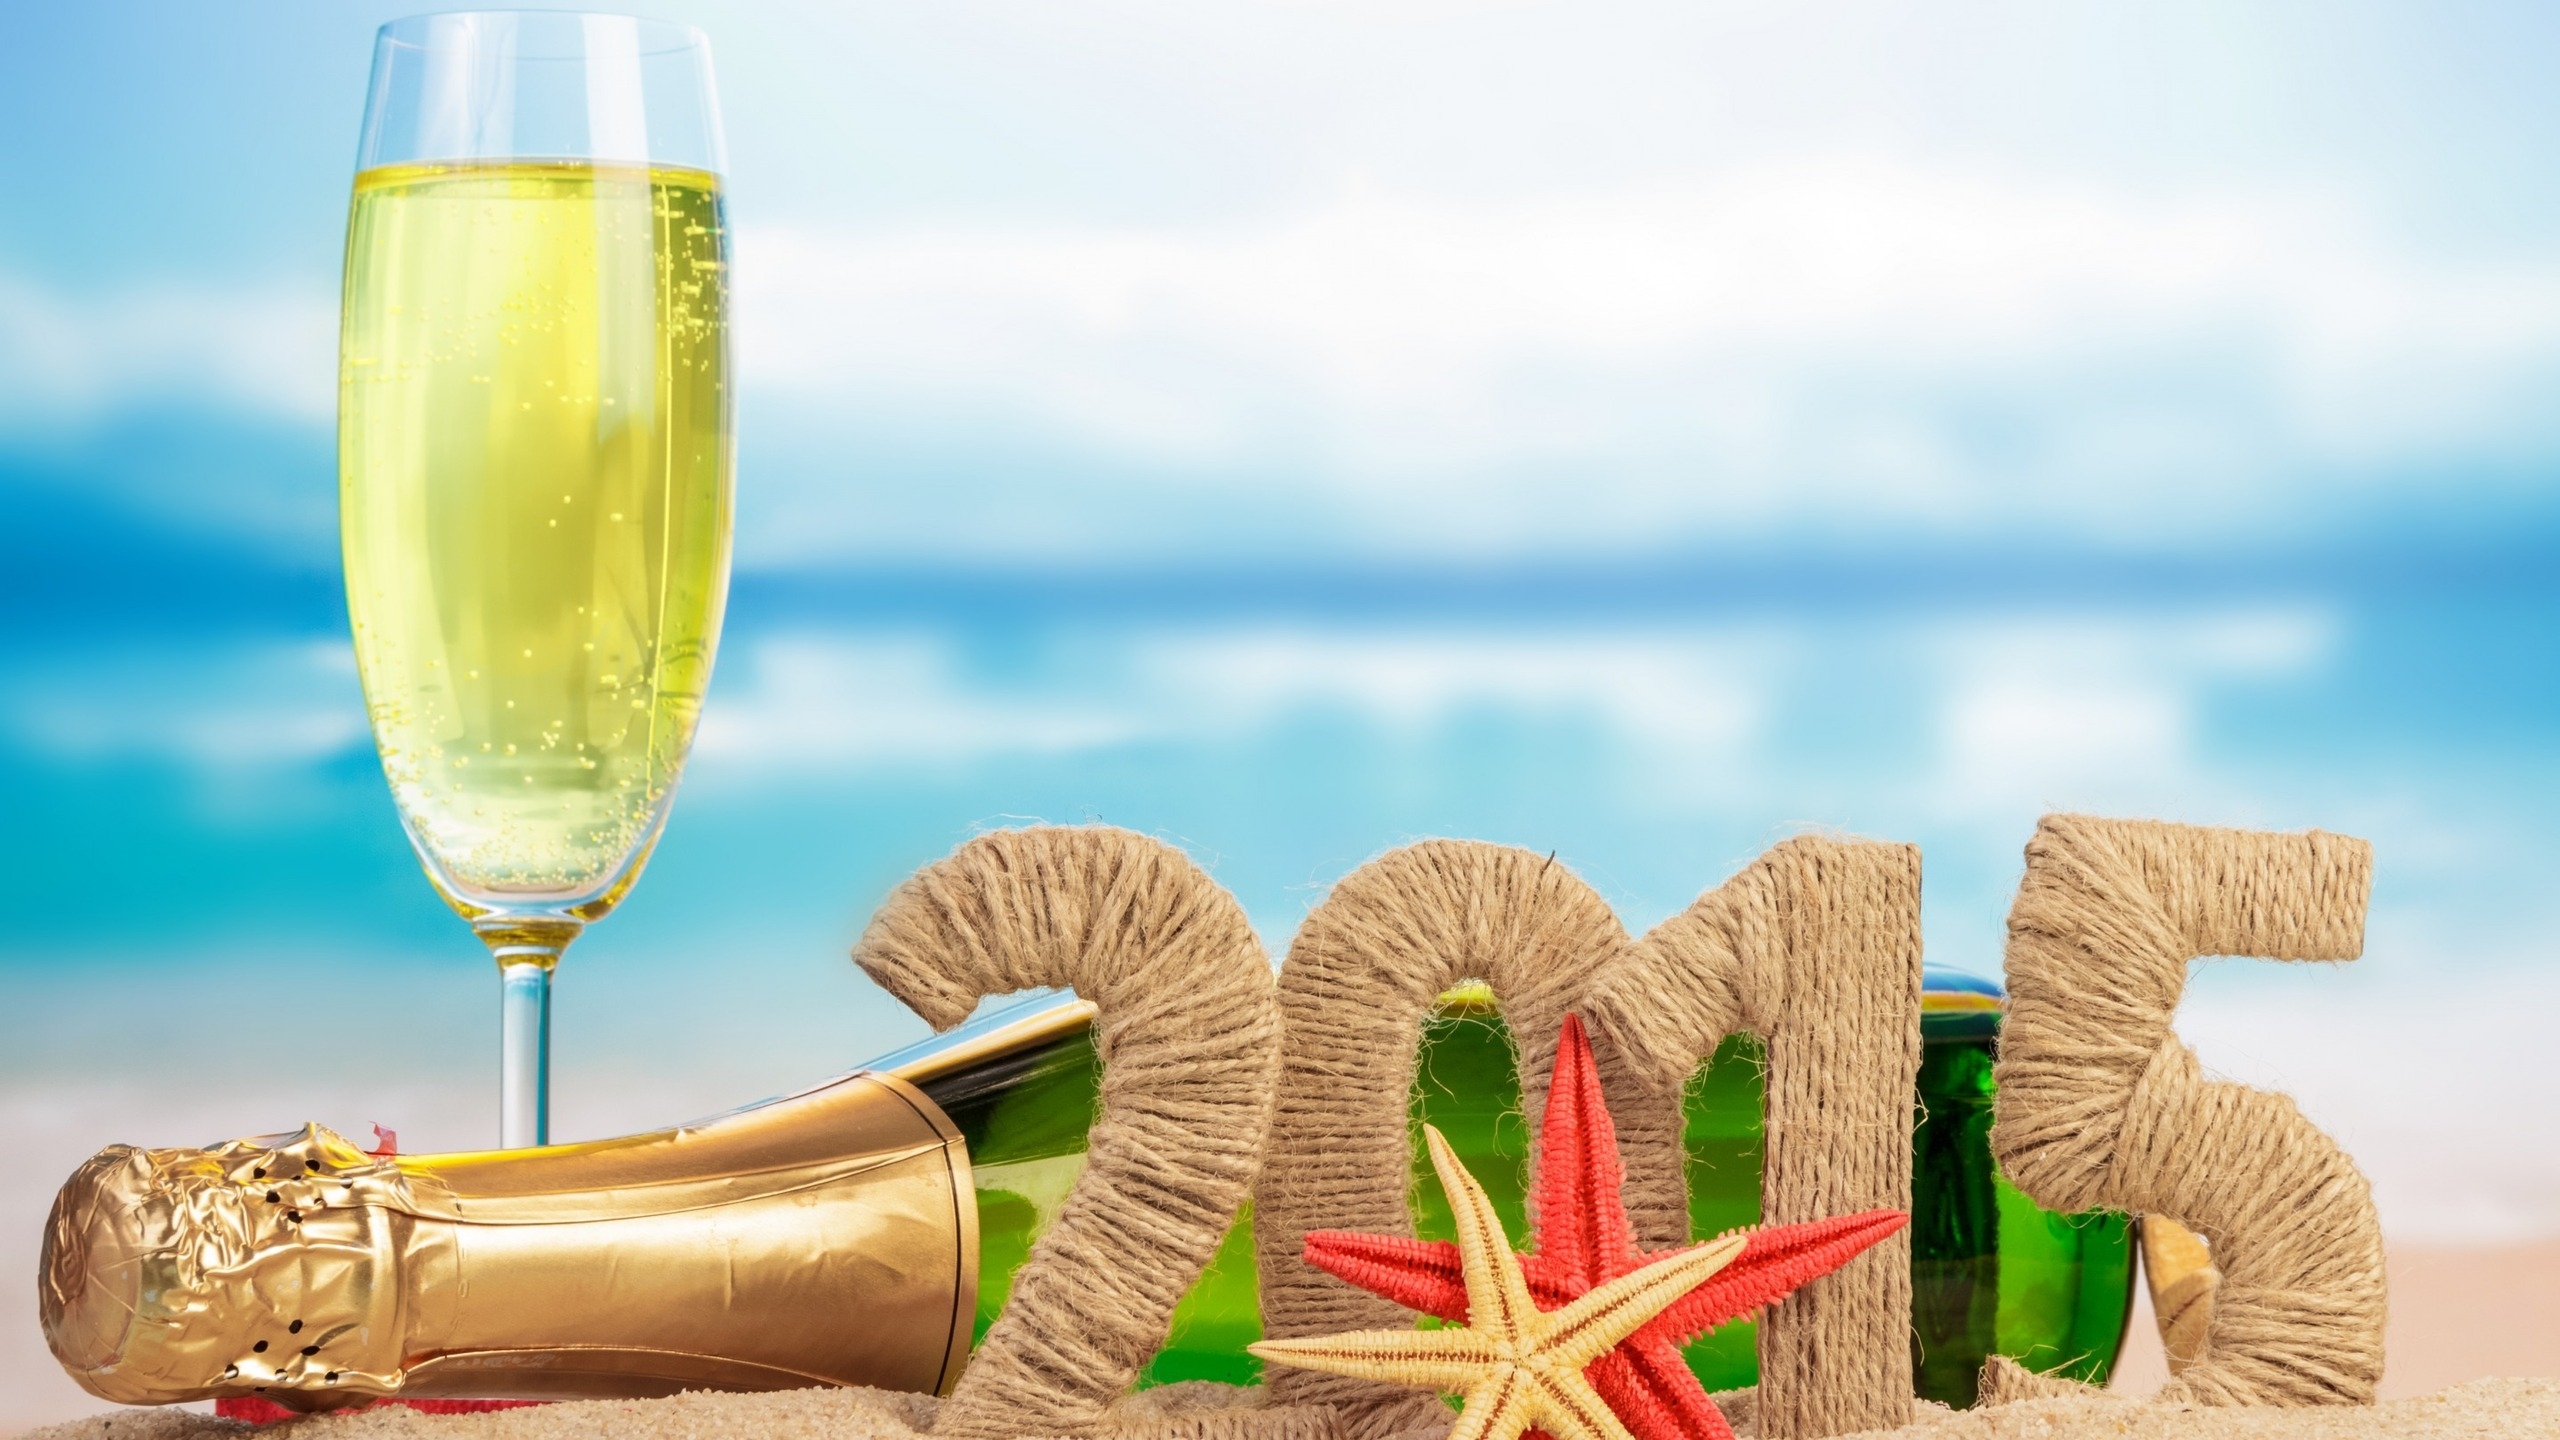 2015 Ornaments and Champagne for 2560x1440 HDTV resolution